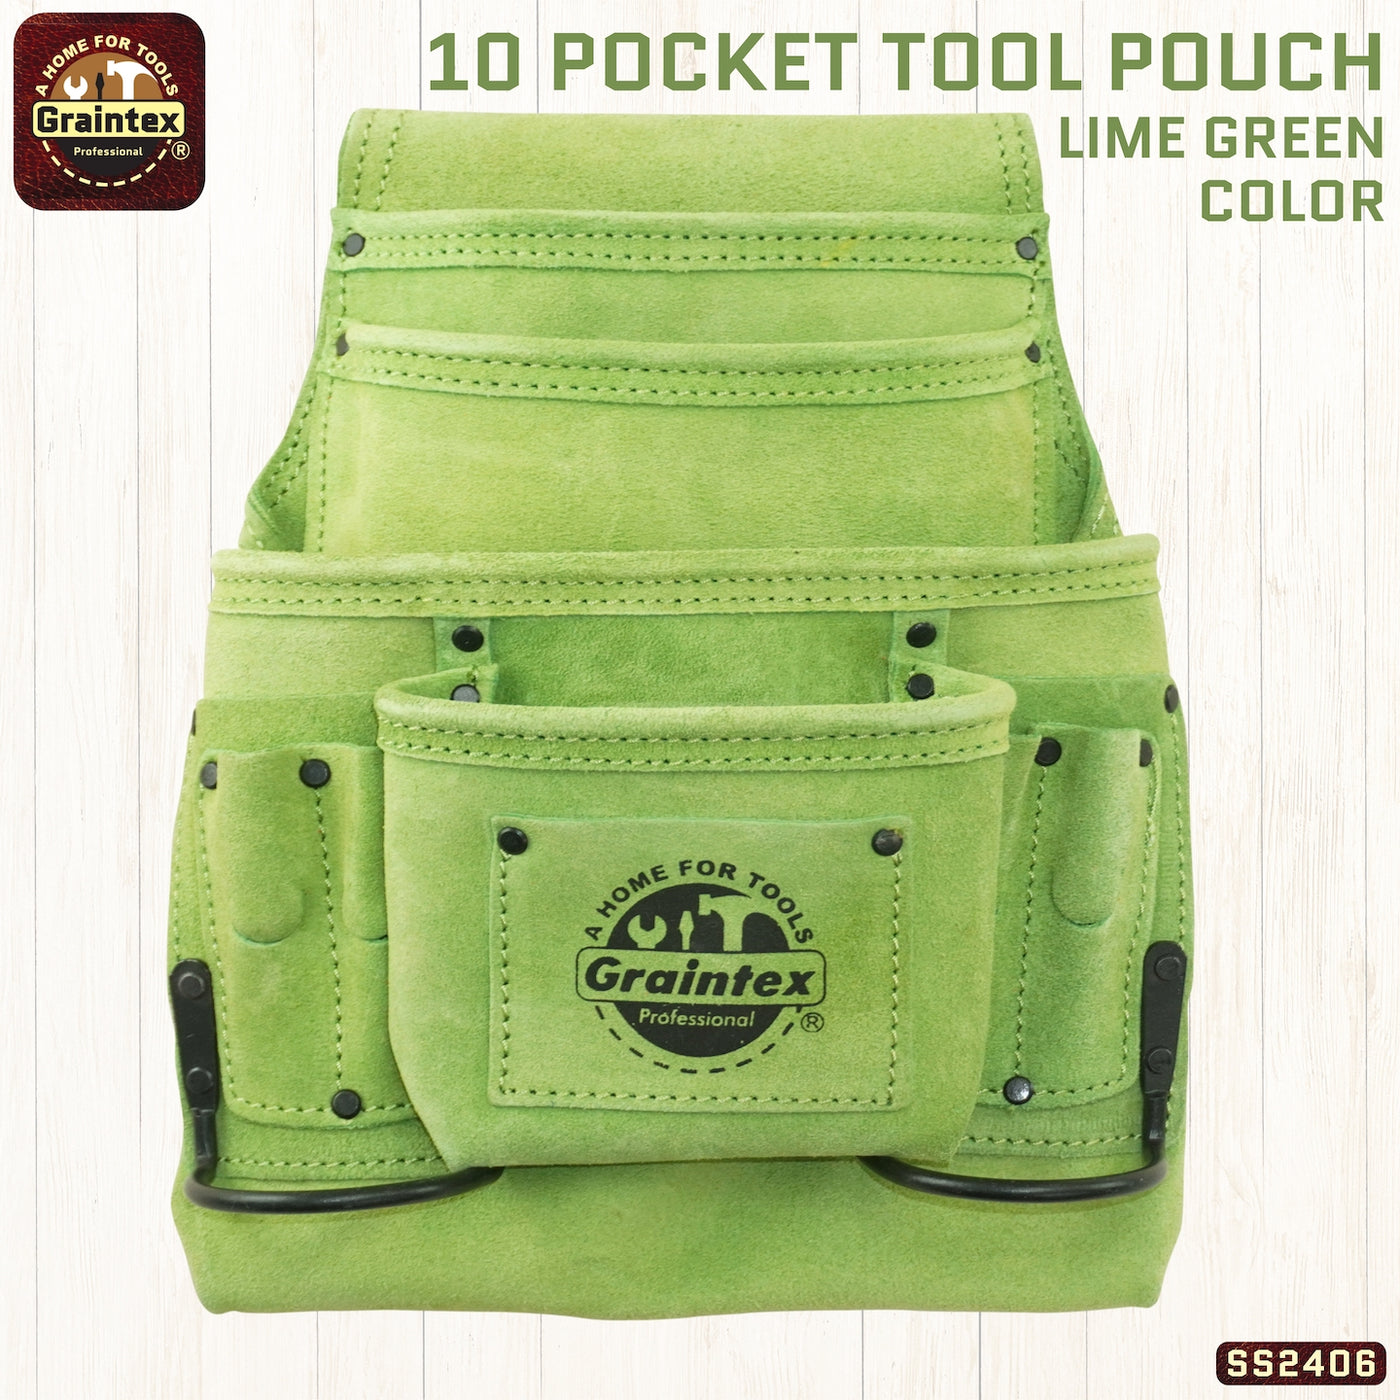 SS2406 :: 10 Pocket Nail & Tool Pouch Lime Green Color Suede Leather